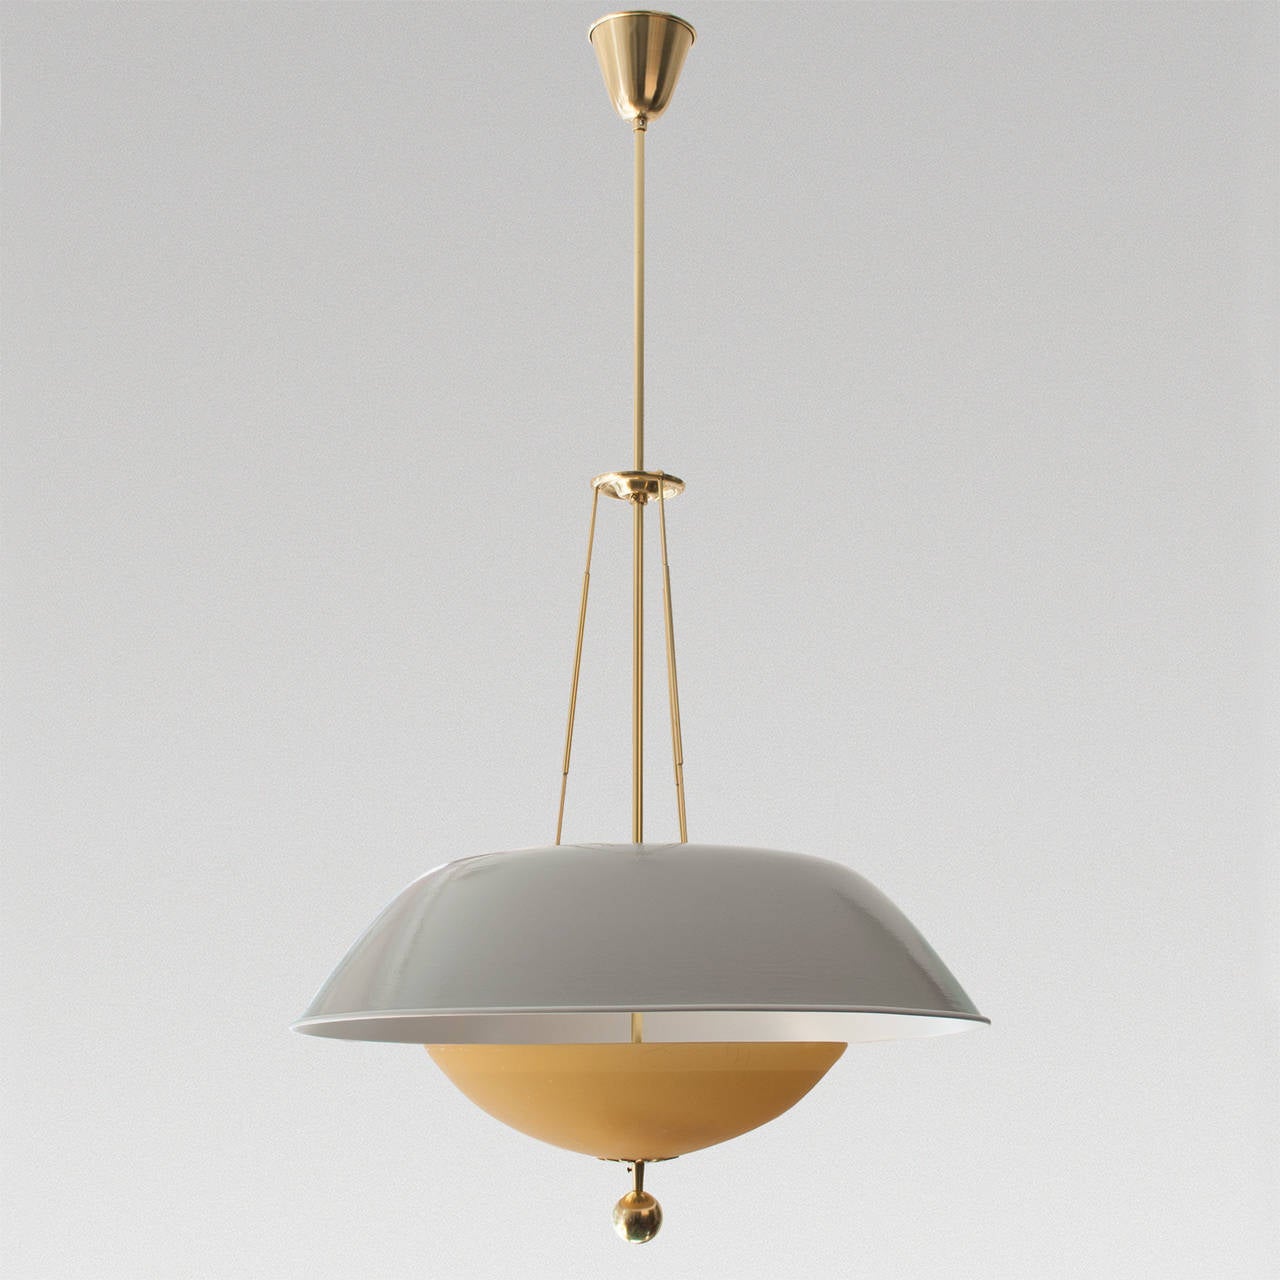 Swedish Mid-Century pendant with gray lacquered metal shade and pale amber glass shade. The metal shade is suspended with three brass rods which join at an adjustable notched brass plate on the main stem and terminate at a decorative brass ring